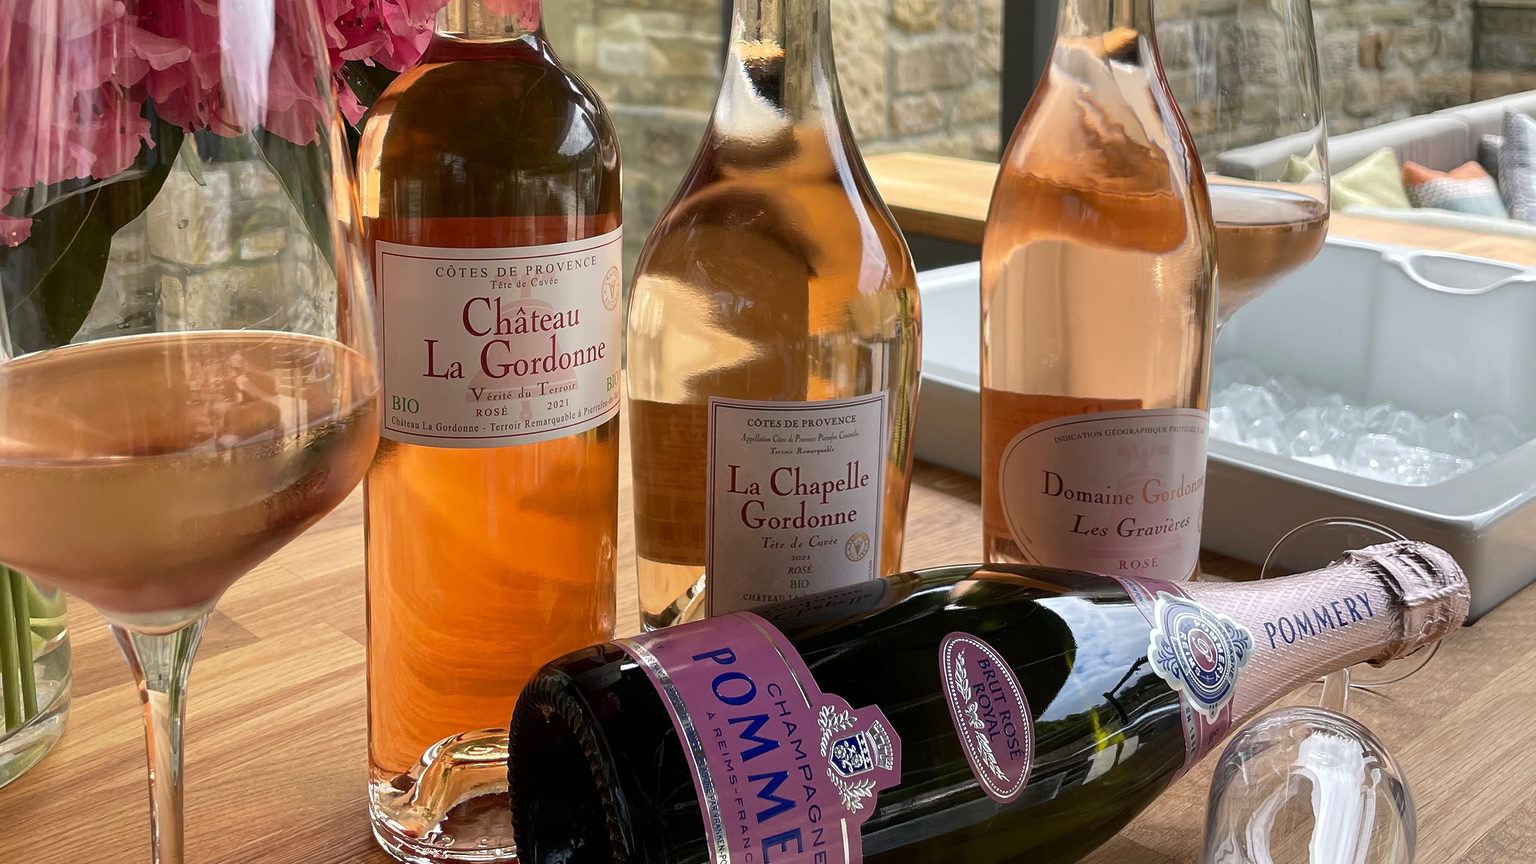 A selection of fine rosé wine bottles, at the Terrace Restaurant and Bar on the Swinton Estate